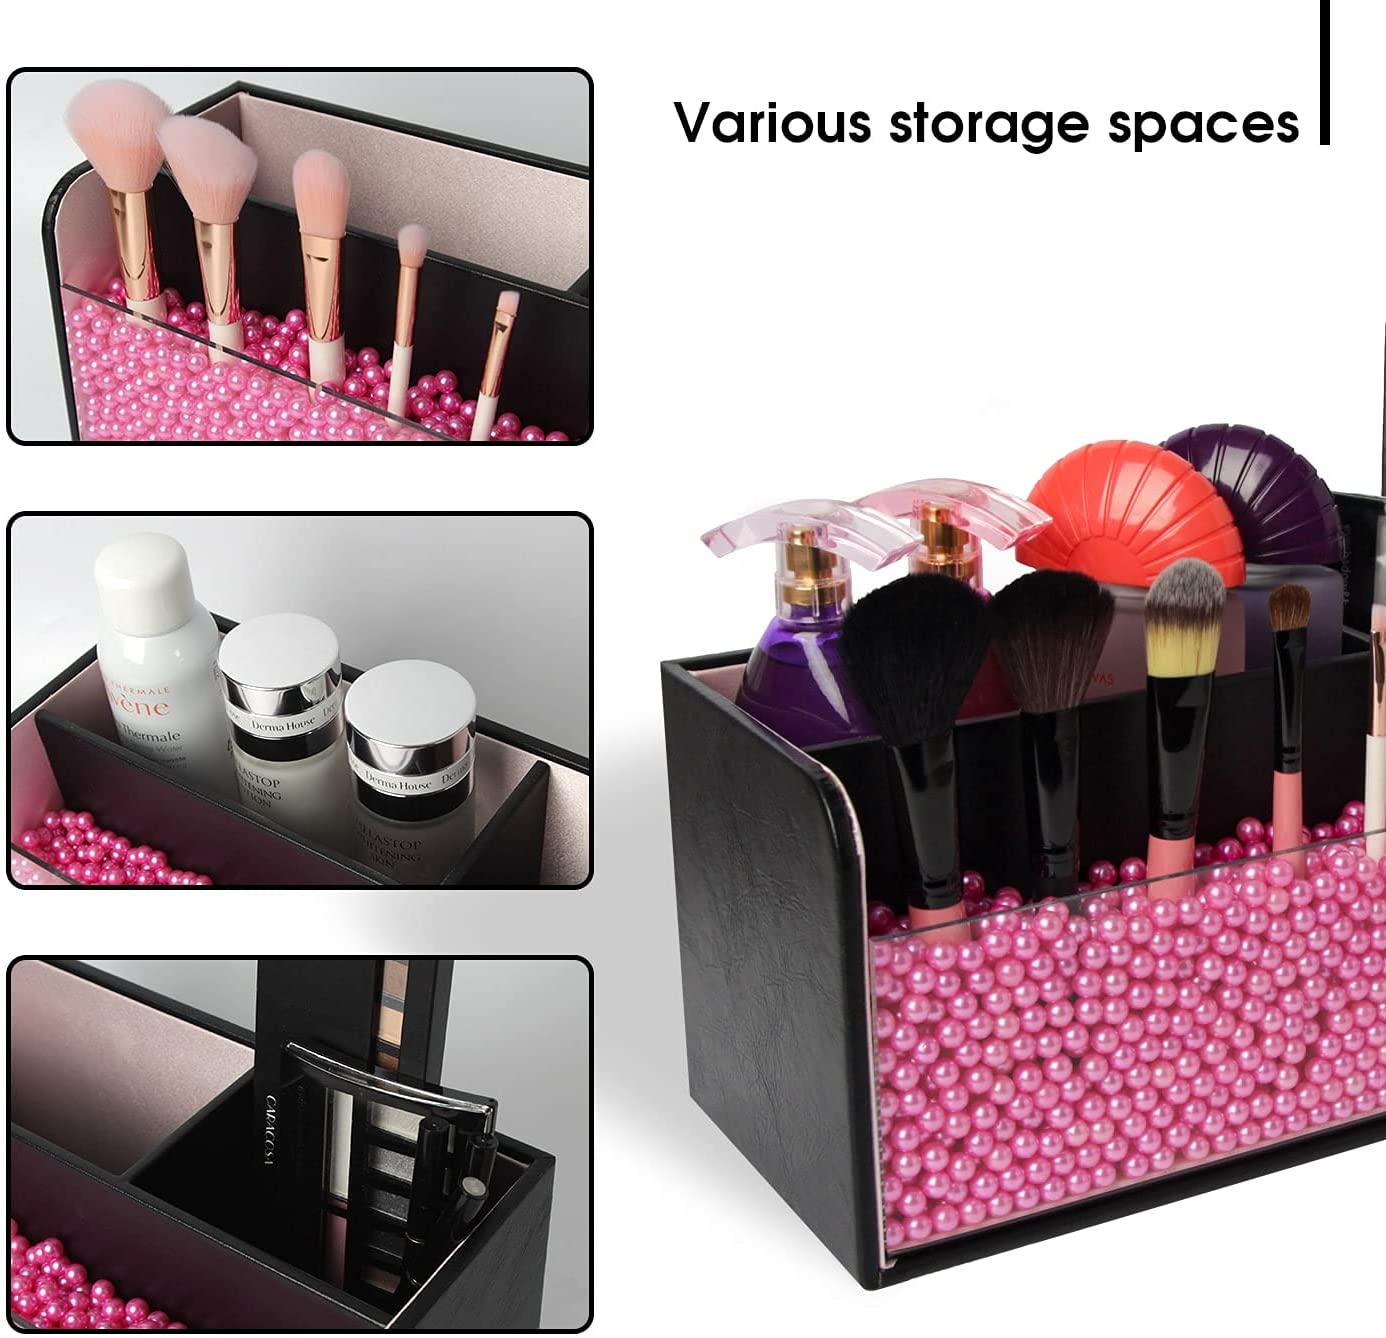 Leather Makeup Brush Cosmetic Organiser Storage Box with Pink Pearls, Acrylic Cover and 3 Compartments(Black)-Health &amp; Beauty &gt; Cosmetic Storage-PEROZ Accessories